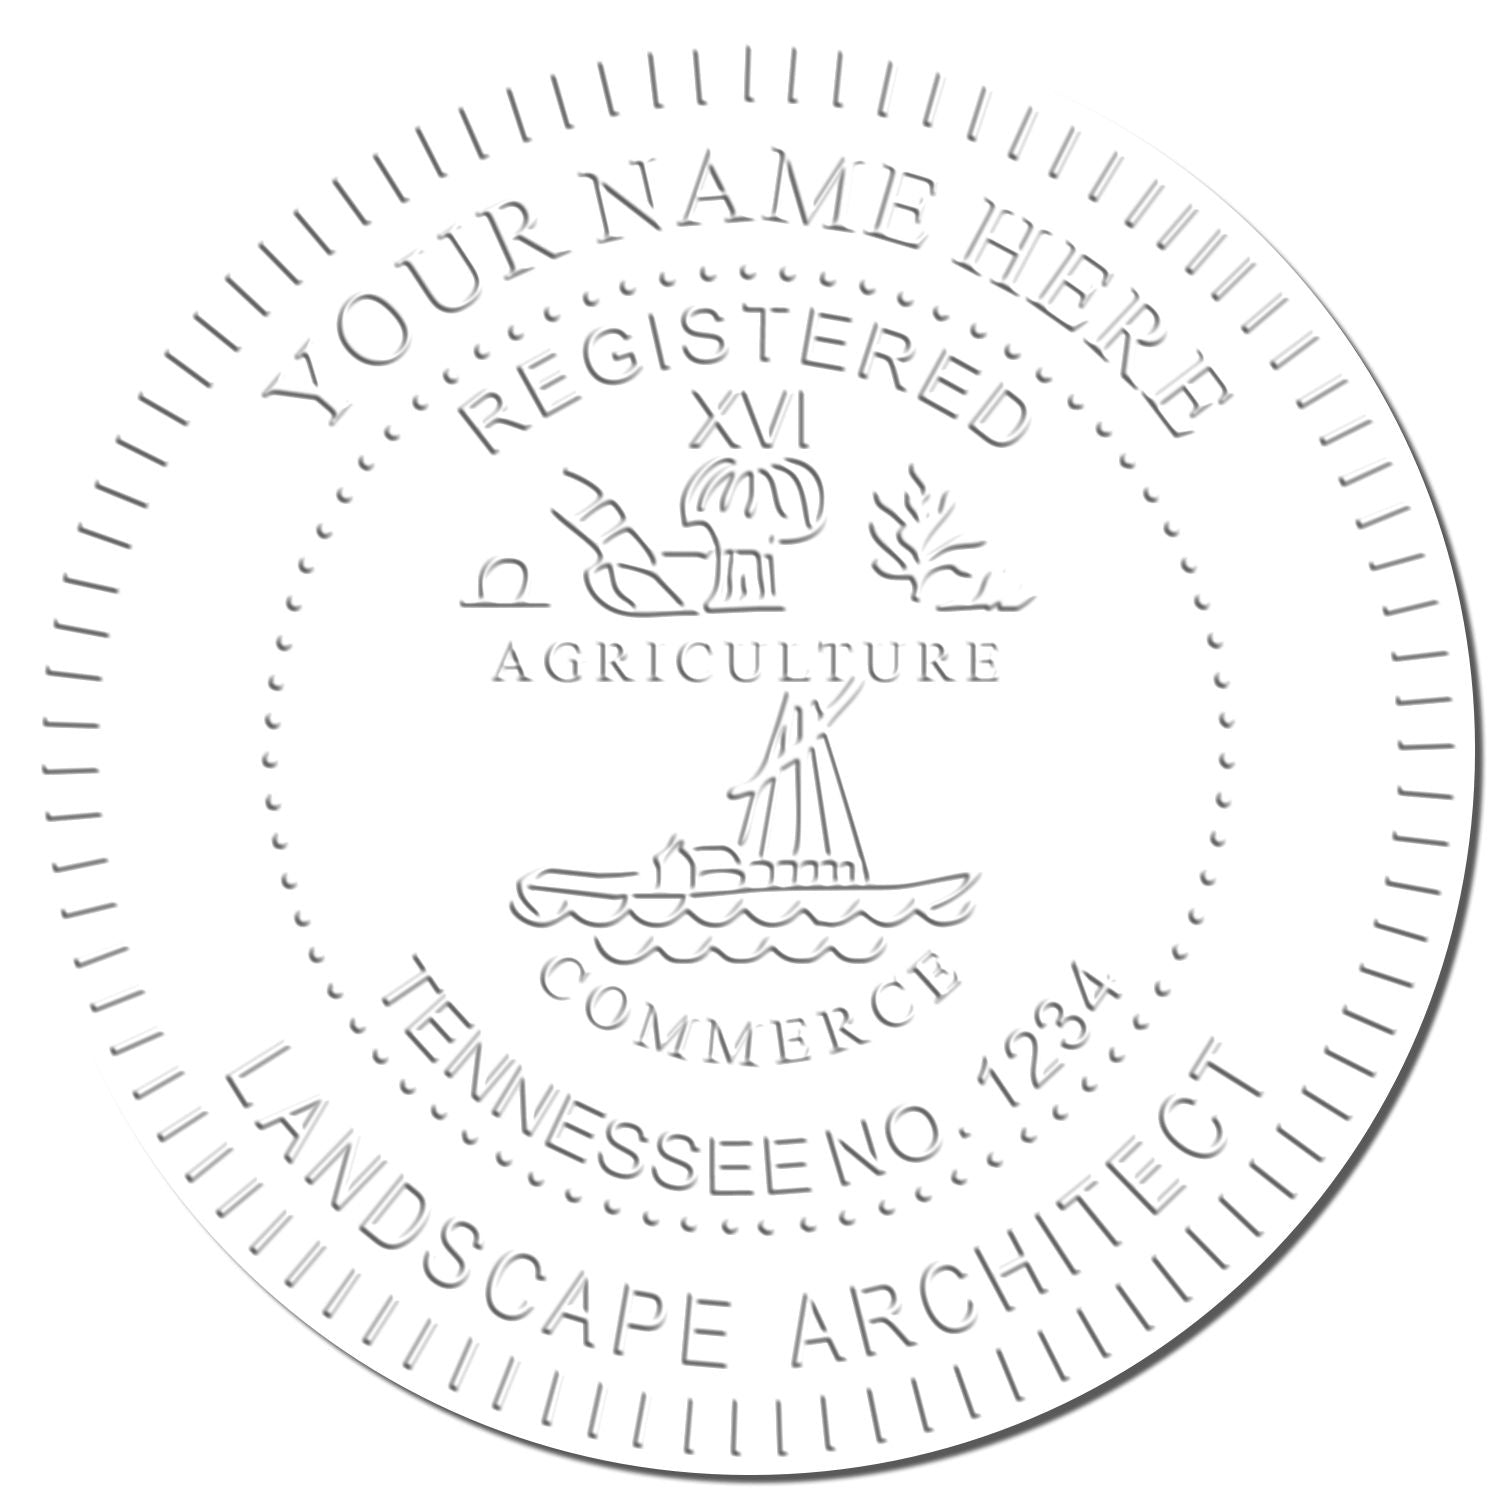 This paper is stamped with a sample imprint of the State of Tennessee Handheld Landscape Architect Seal, signifying its quality and reliability.